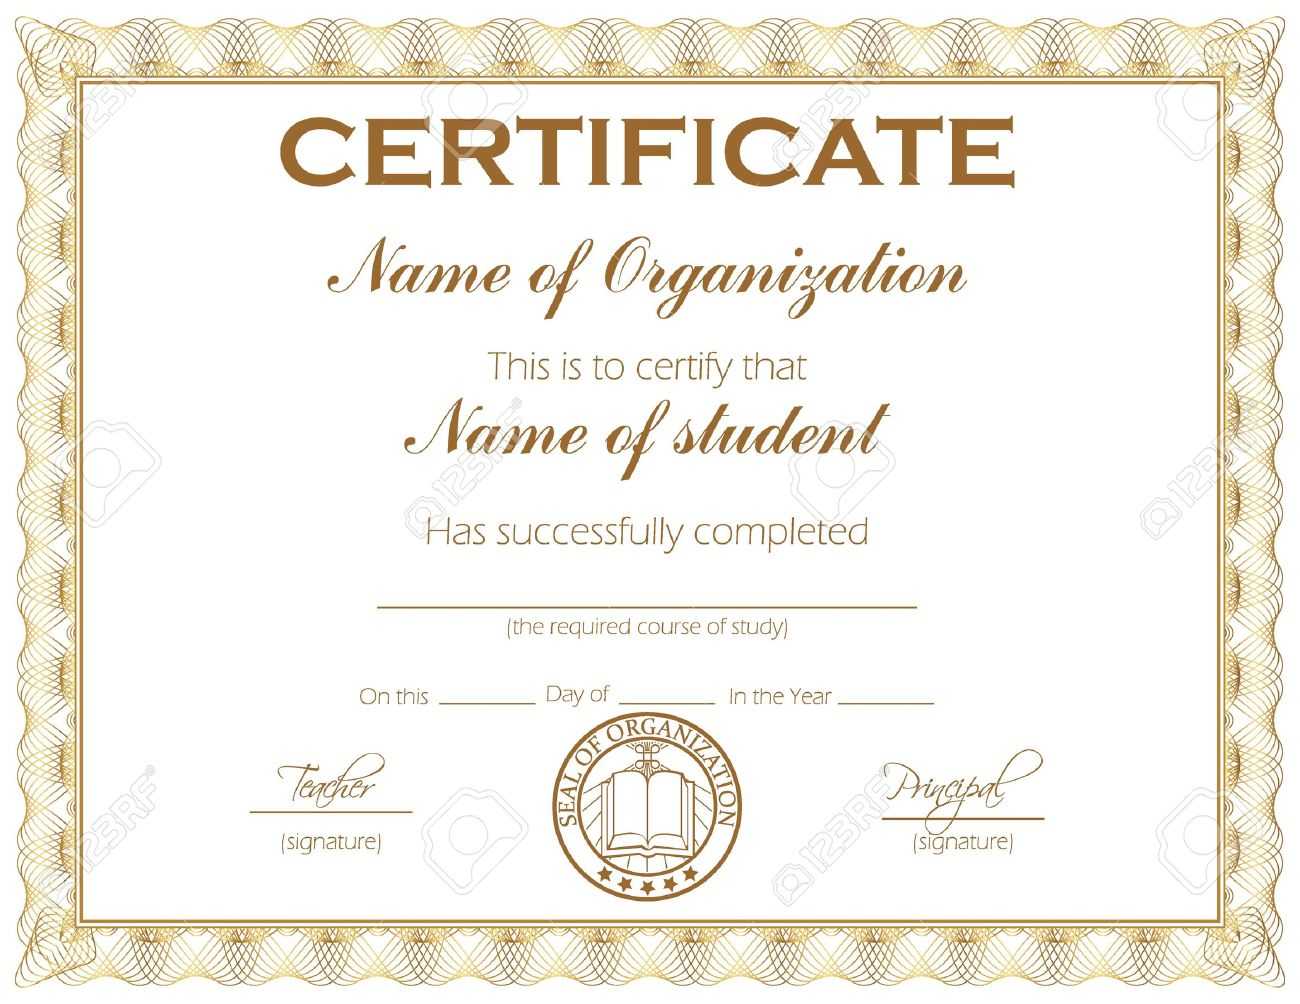 General Purpose Certificate Or Award With Sample Text That Can.. Throughout Student Of The Year Award Certificate Templates